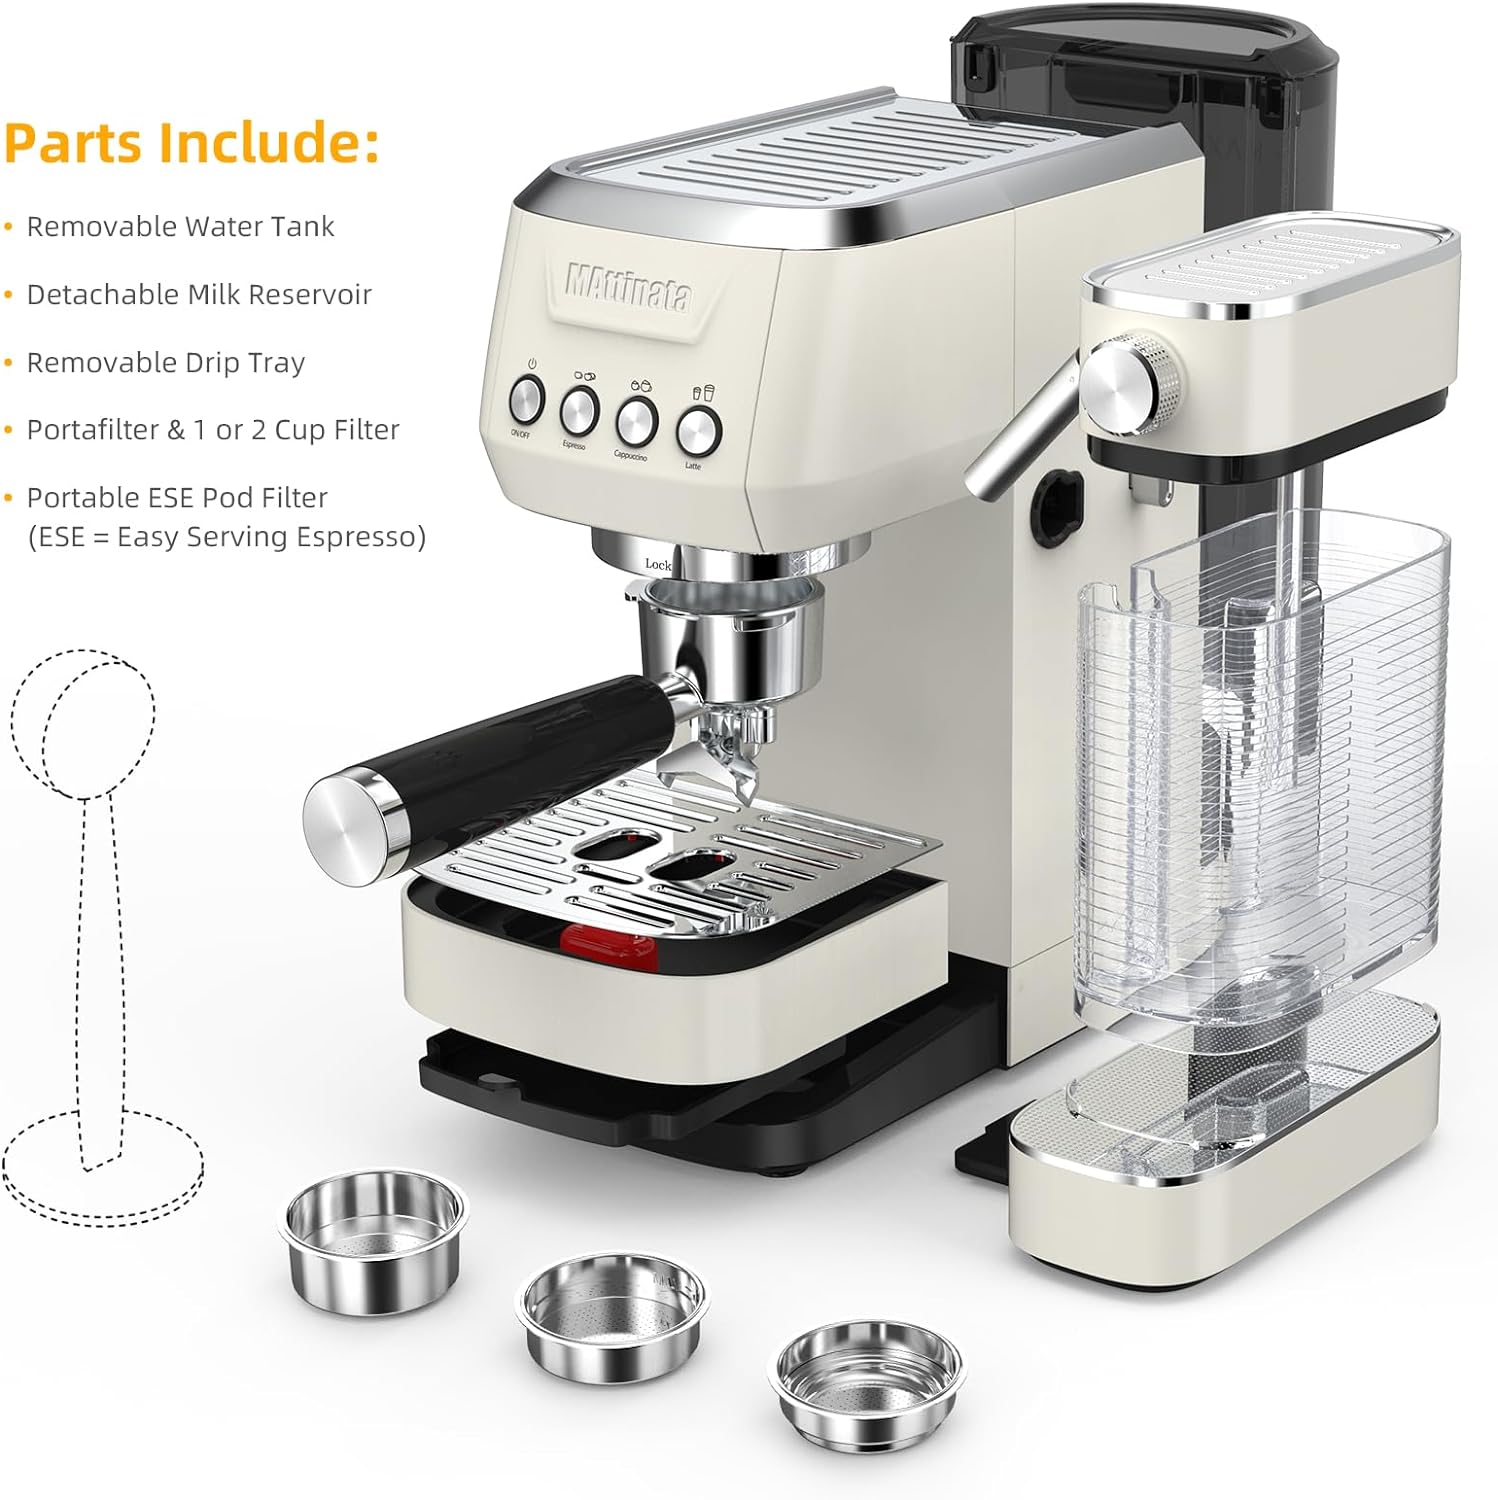 MAttinata Cappuccino Machine and Espresso Machine, 20 Bar Stainless Steel Latte Maker for Home with Automatic Milk Frothing System, Valentines Day Gifts for Him/Her